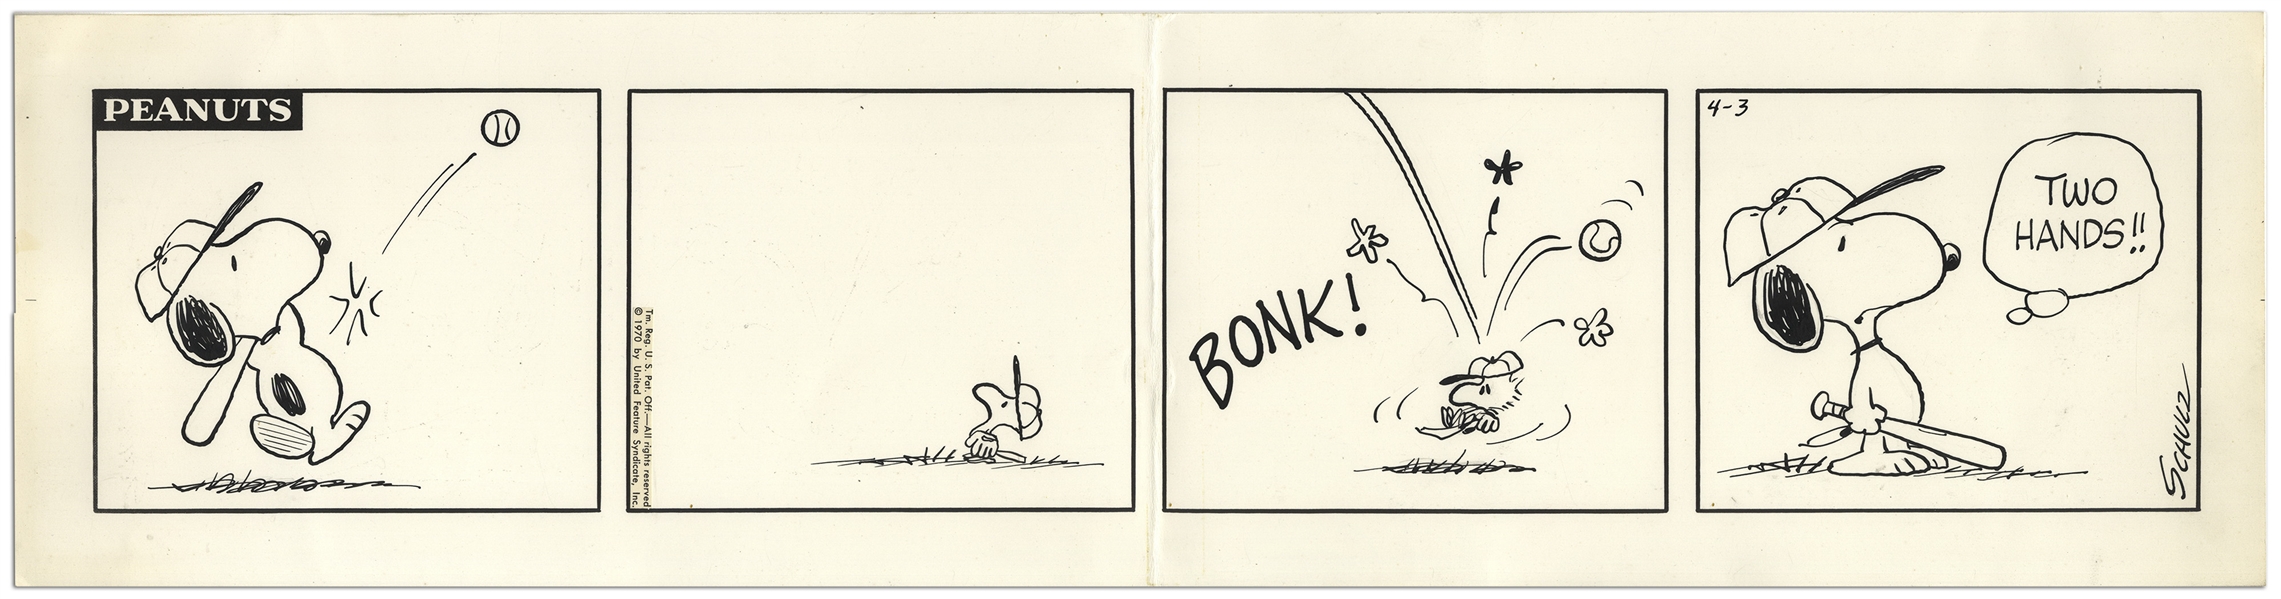 Charles Schulz Original Hand-Drawn ''Peanuts'' Comic Strip -- Snoopy Hits a Baseball to Woodstock, Who's About as Big as the Ball